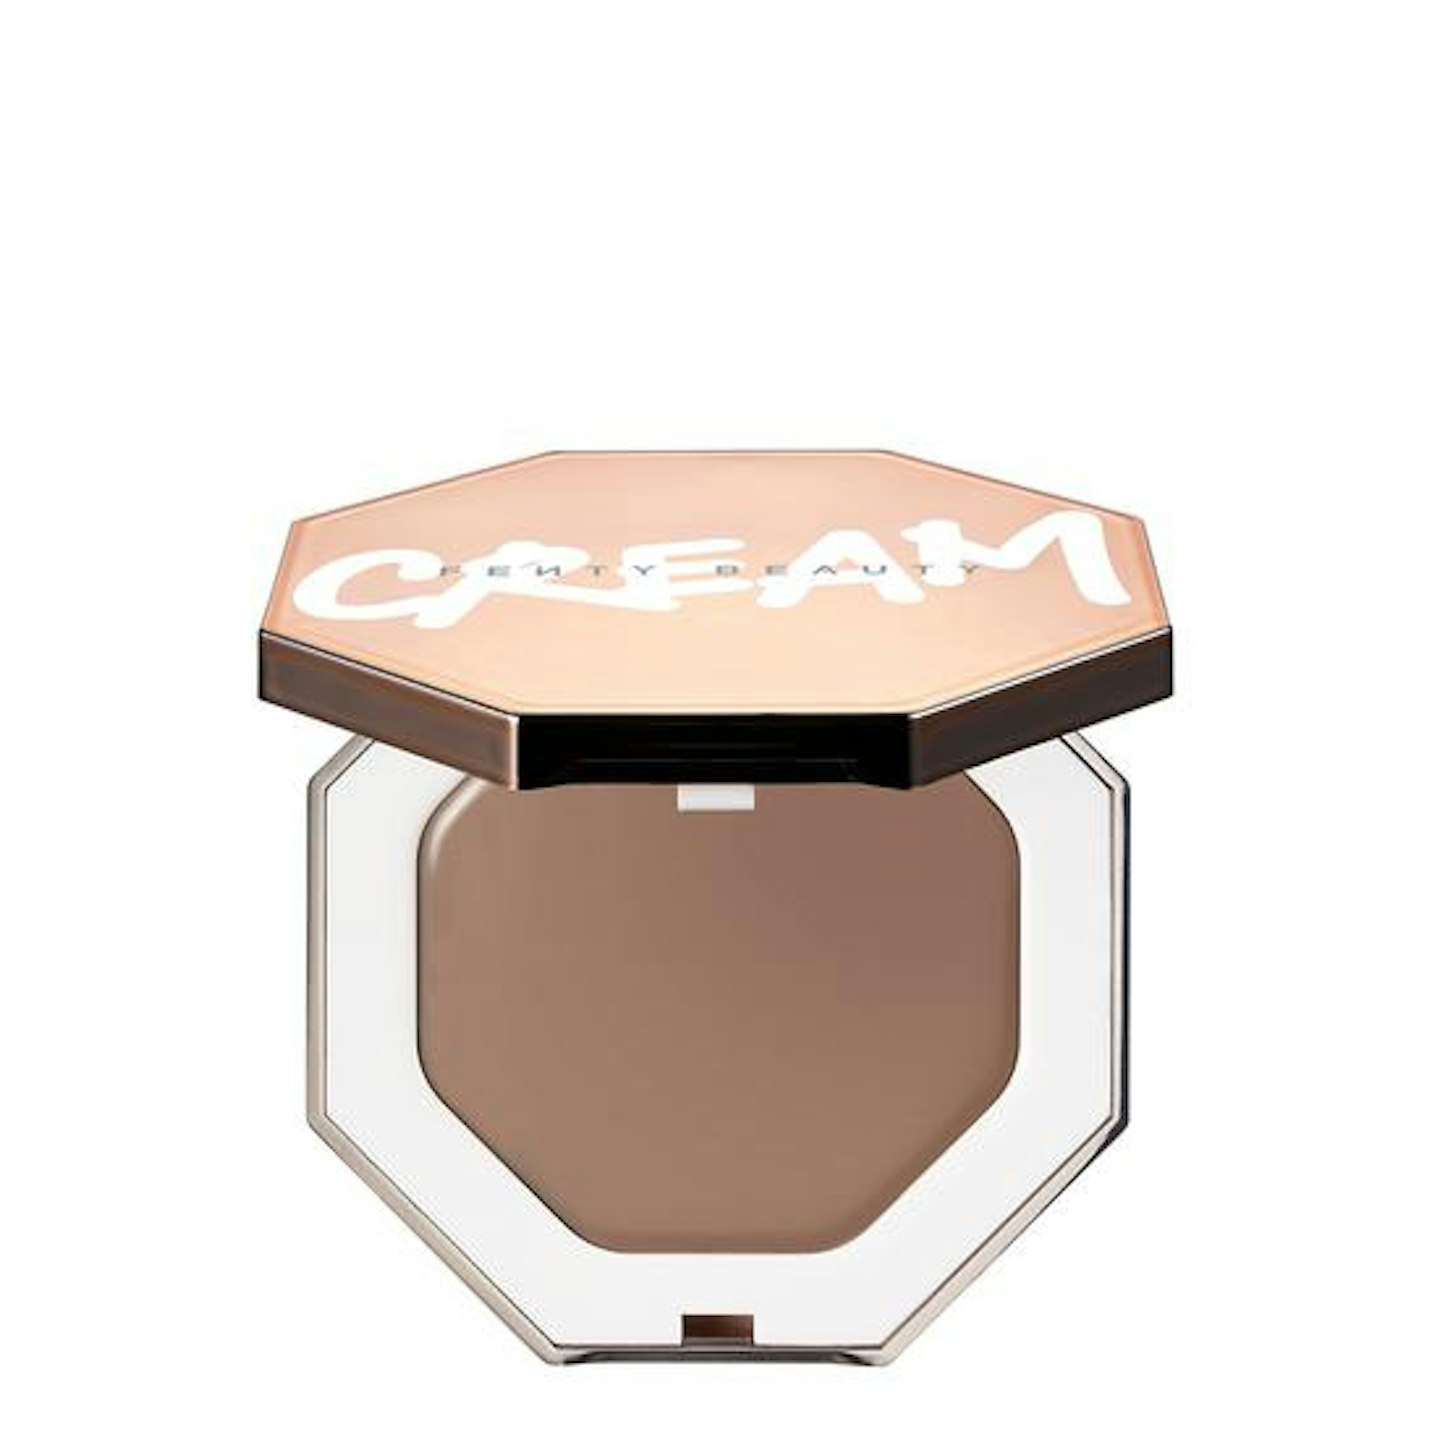 SHOP: The Best Fenty Beauty Products 2022